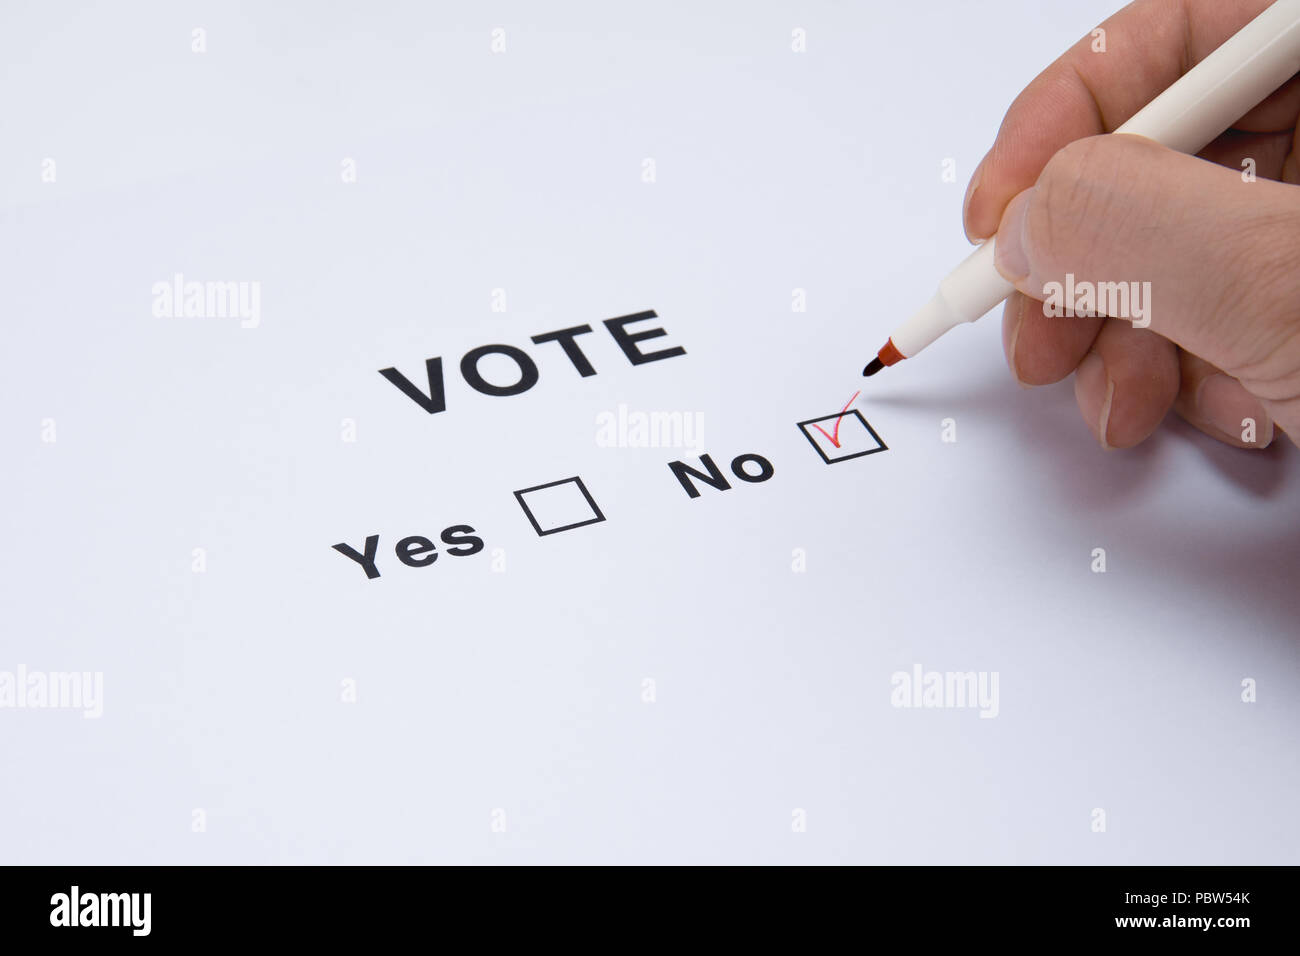 Yes And No Checkbox Marking. Stock Photo